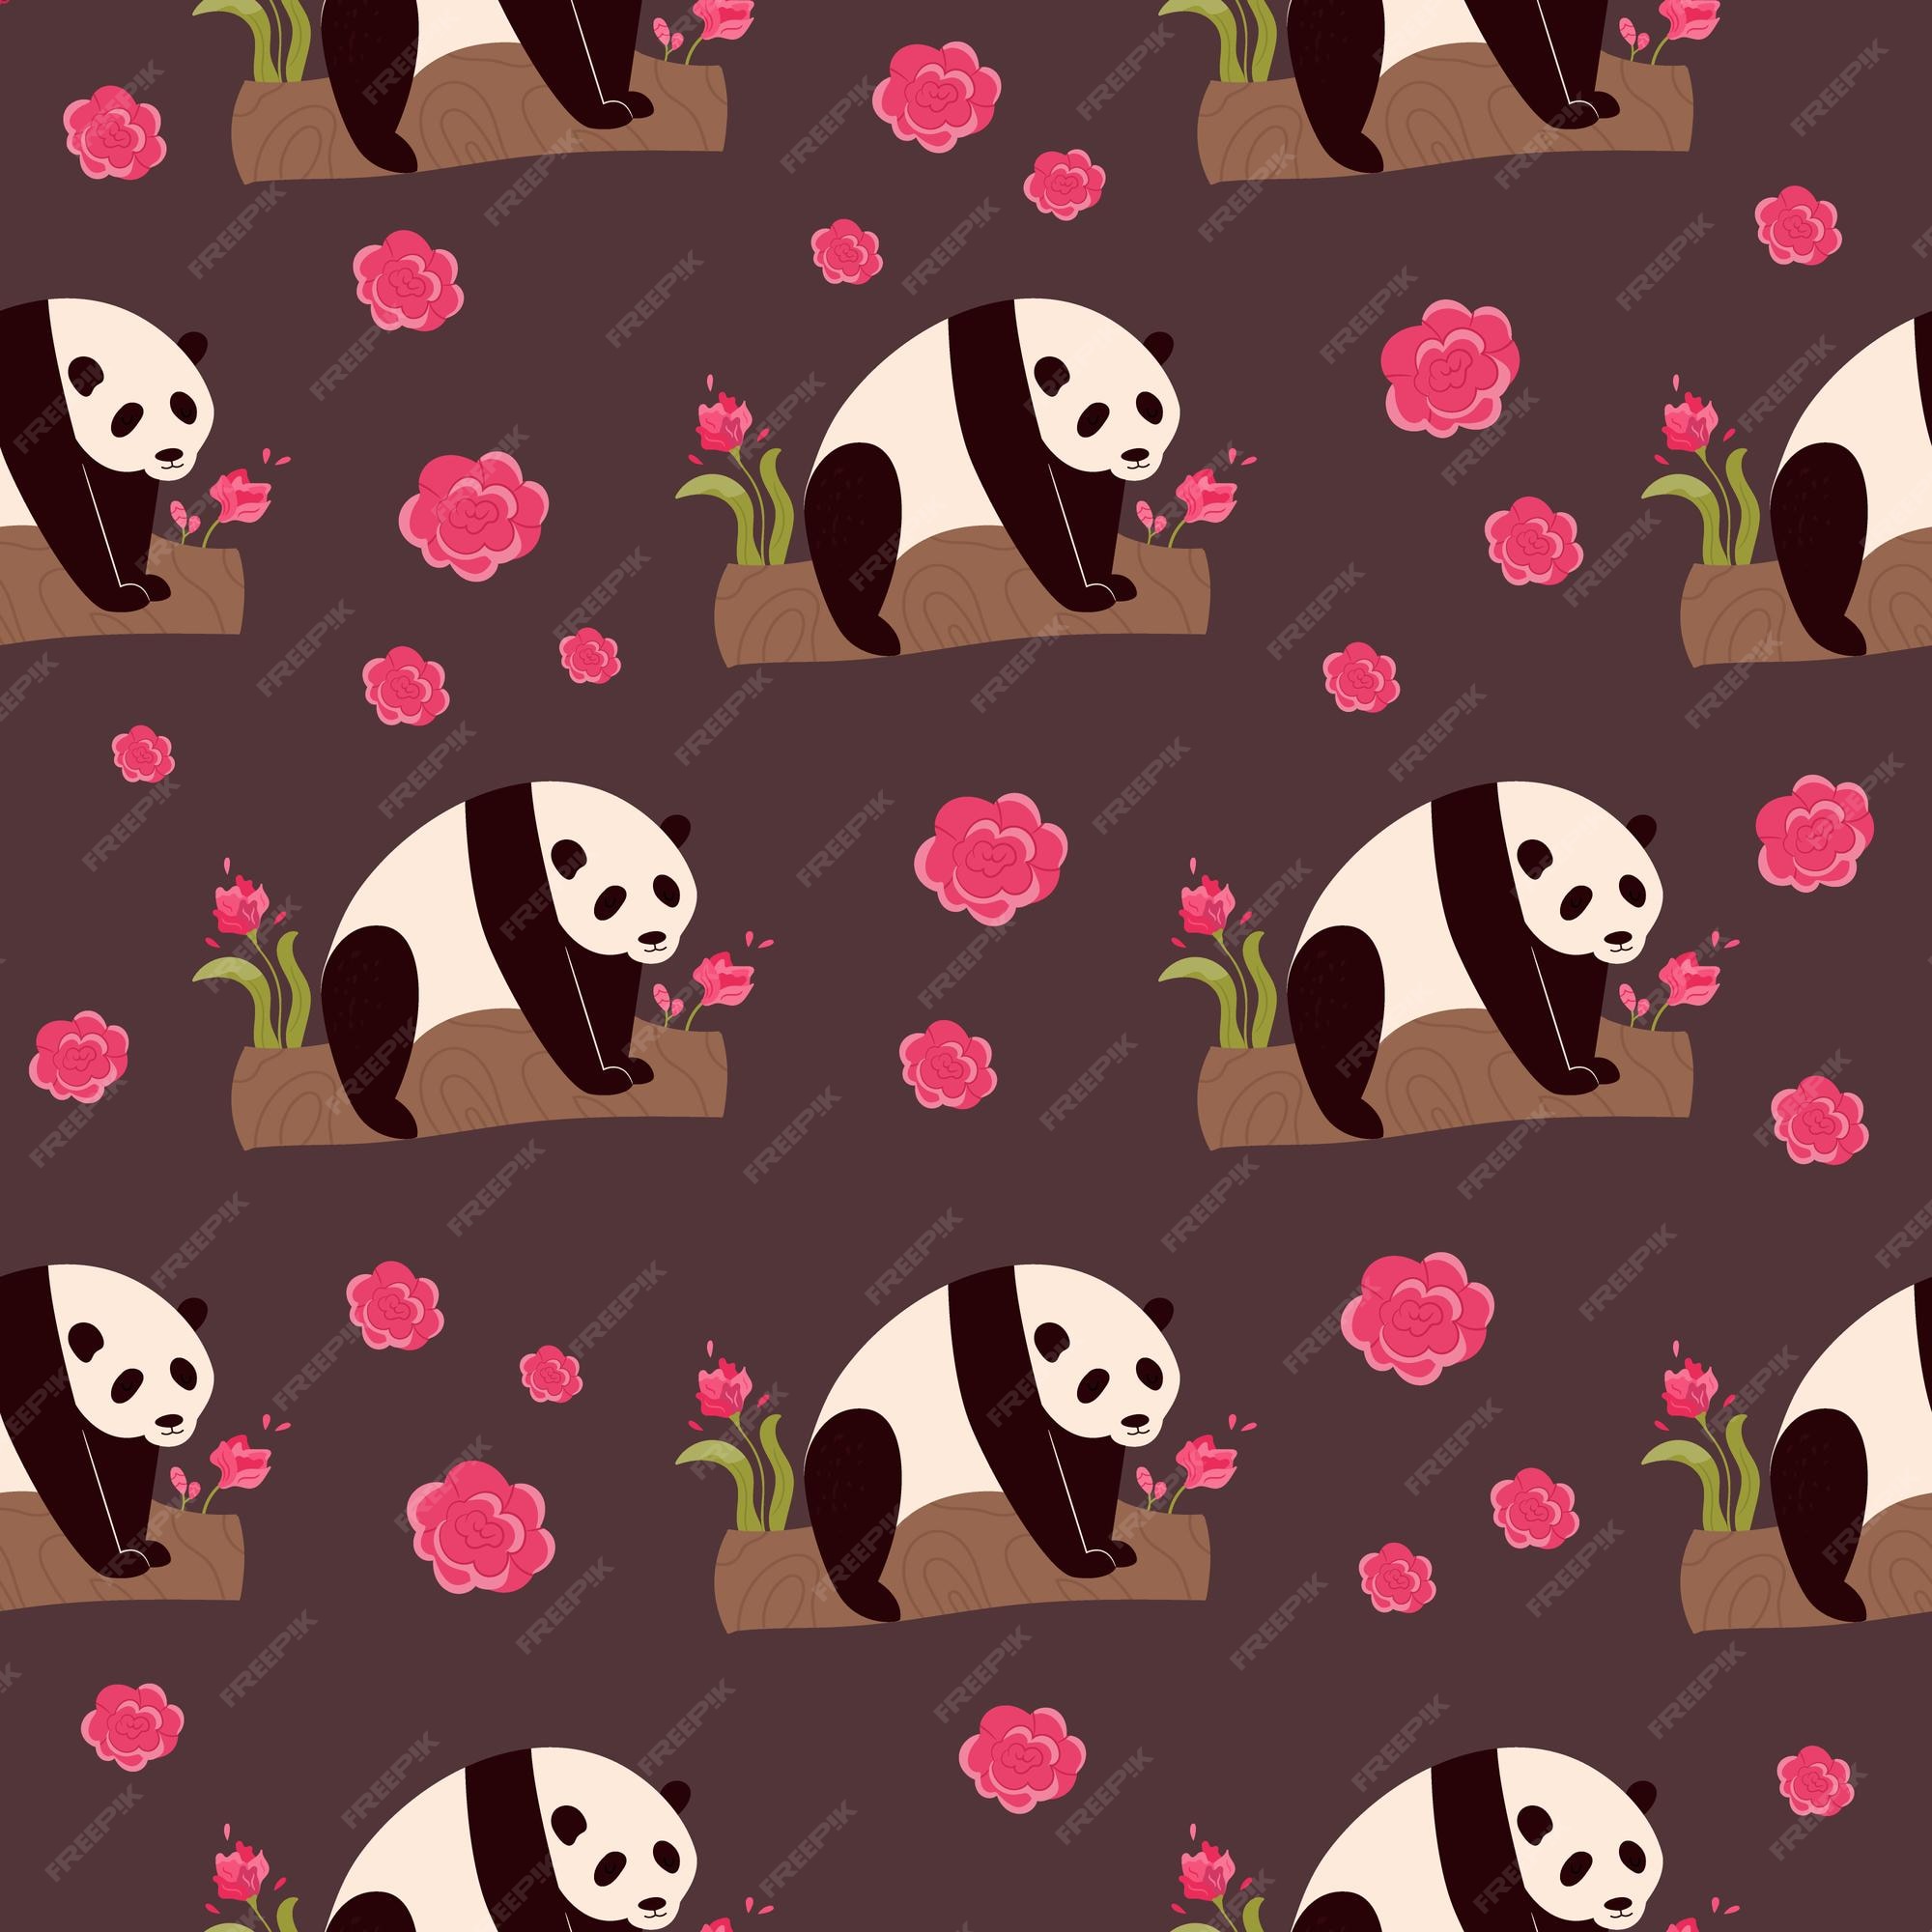 Premium Vector | Seamless pattern with cute pandas and floral ornament  vector illustration for wallpapers decorations gift box textiles